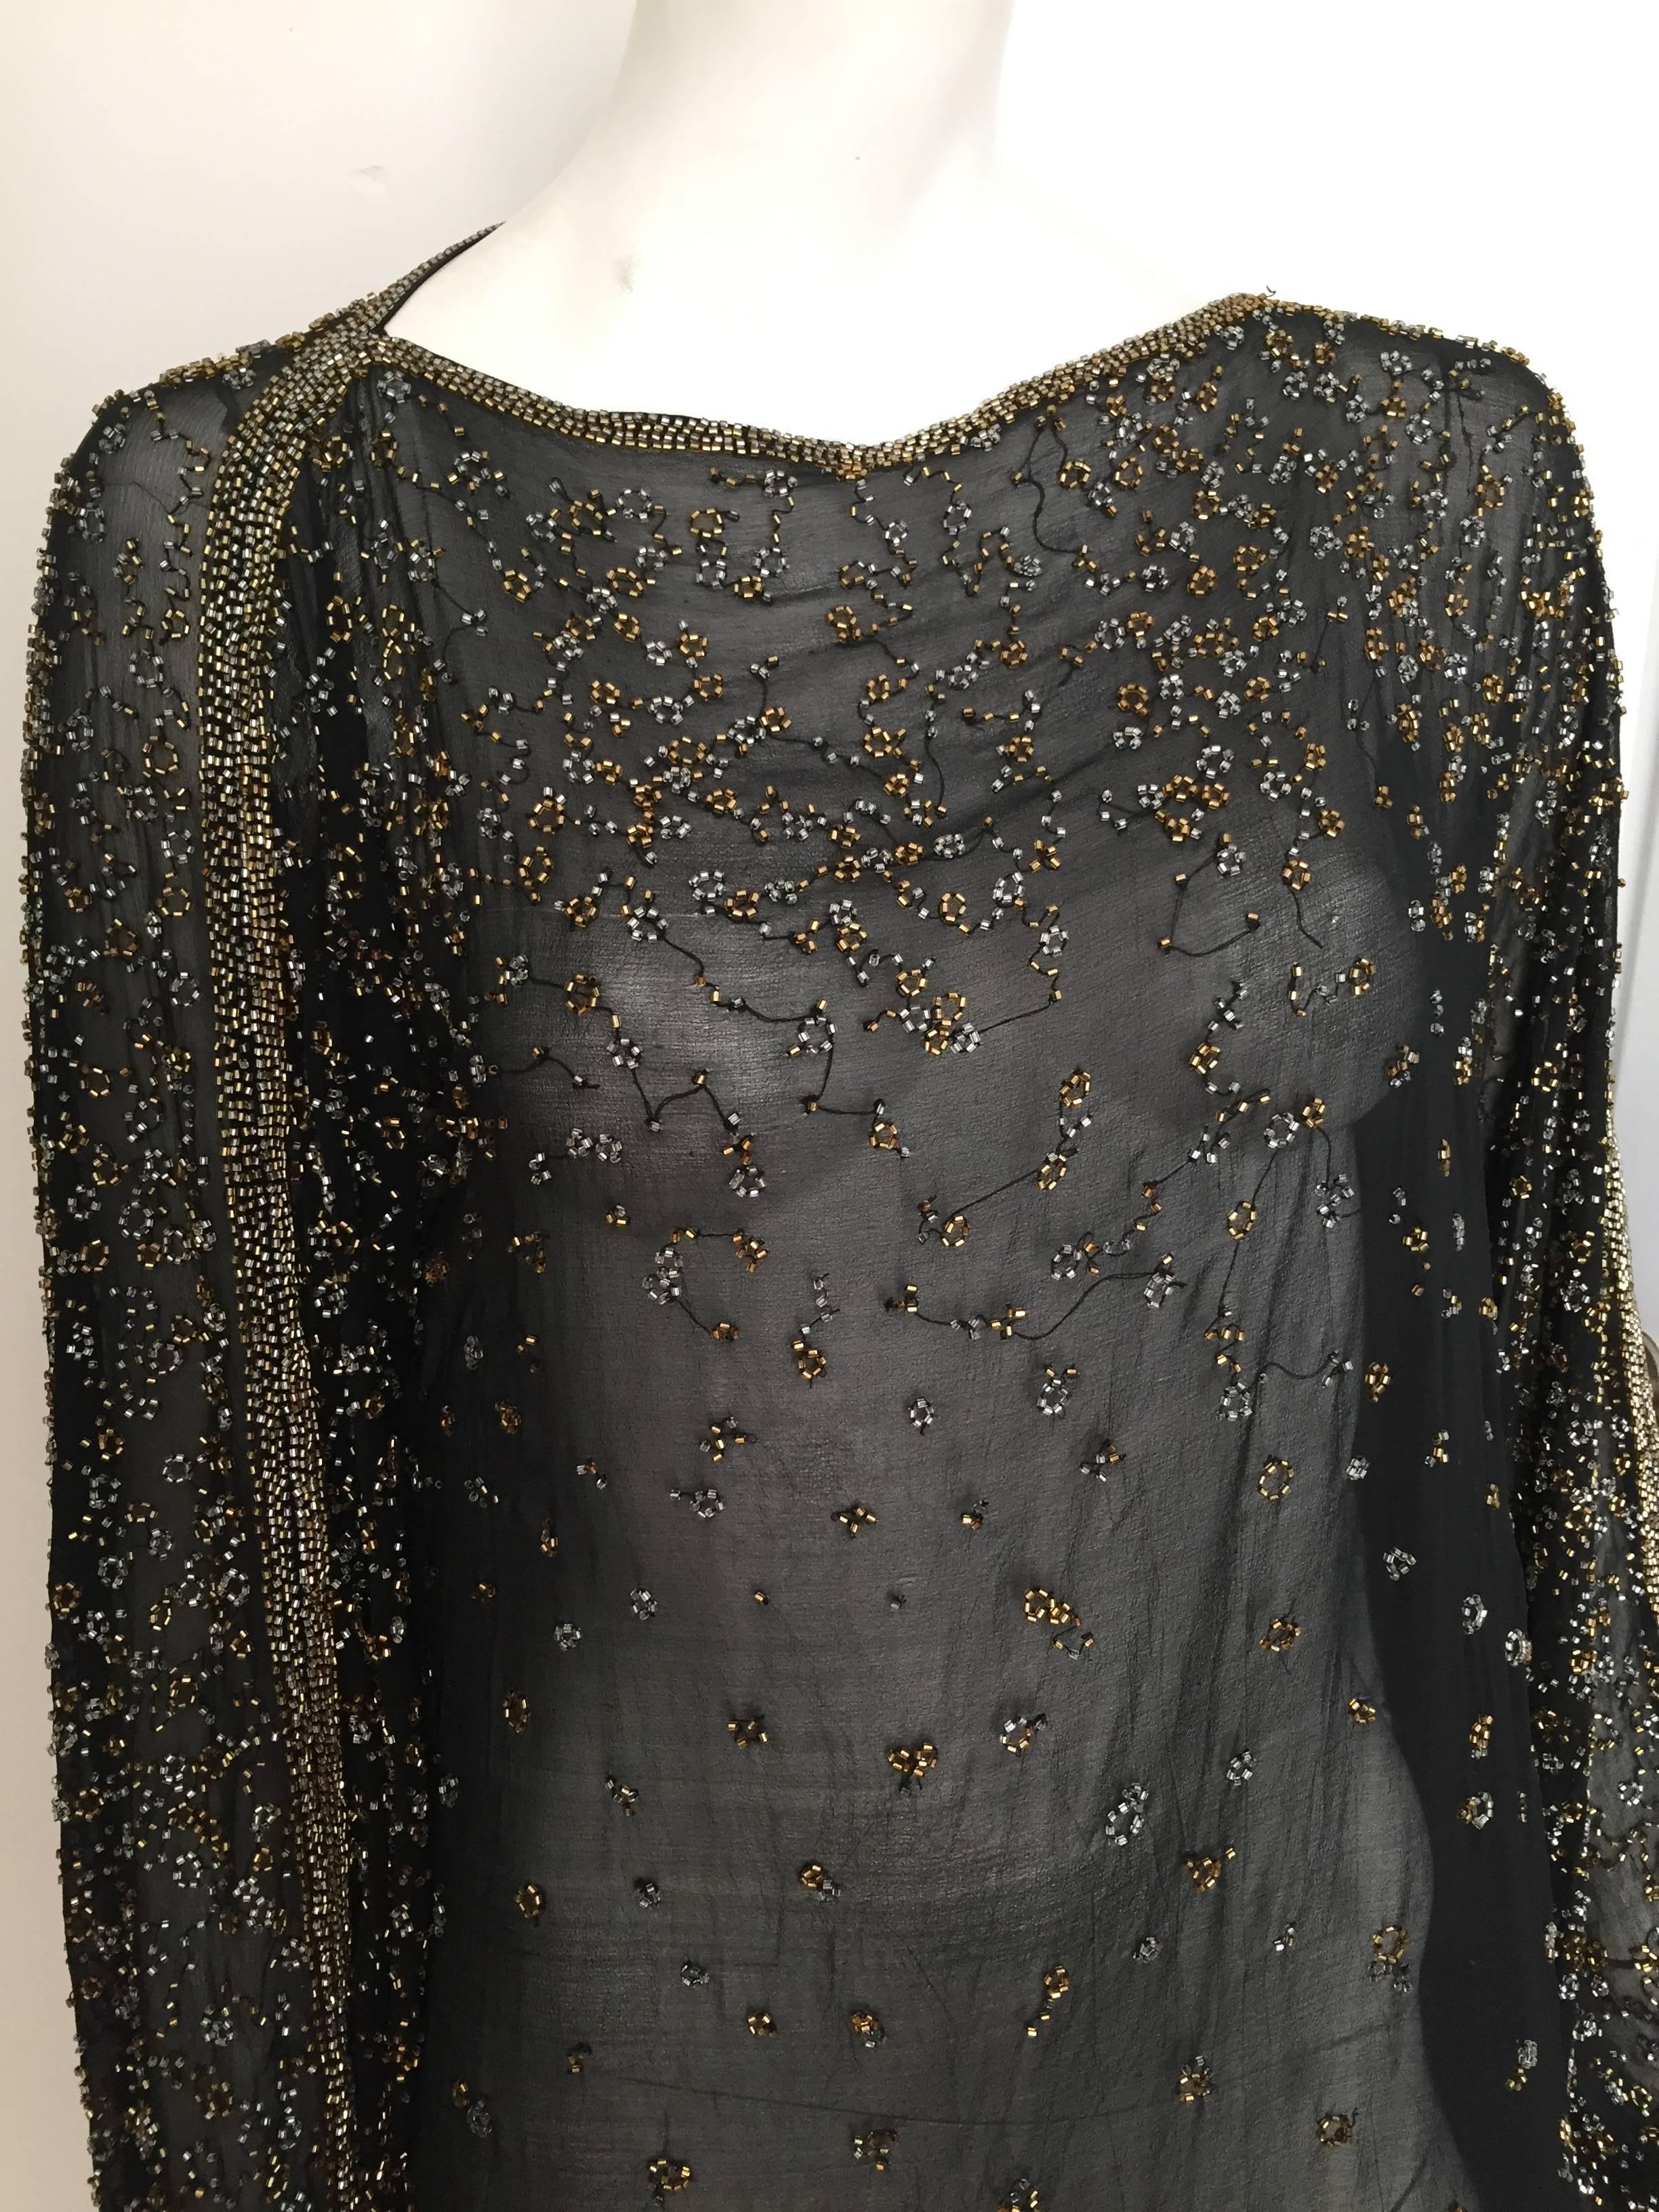 Halston 1970s black silk beaded sheer dress is a size large and will fit size 8 / 10 but please see & use measurements below so you can properly measure your body to make sure this will fit you the way Halston would be proud of. Wear a sexy black